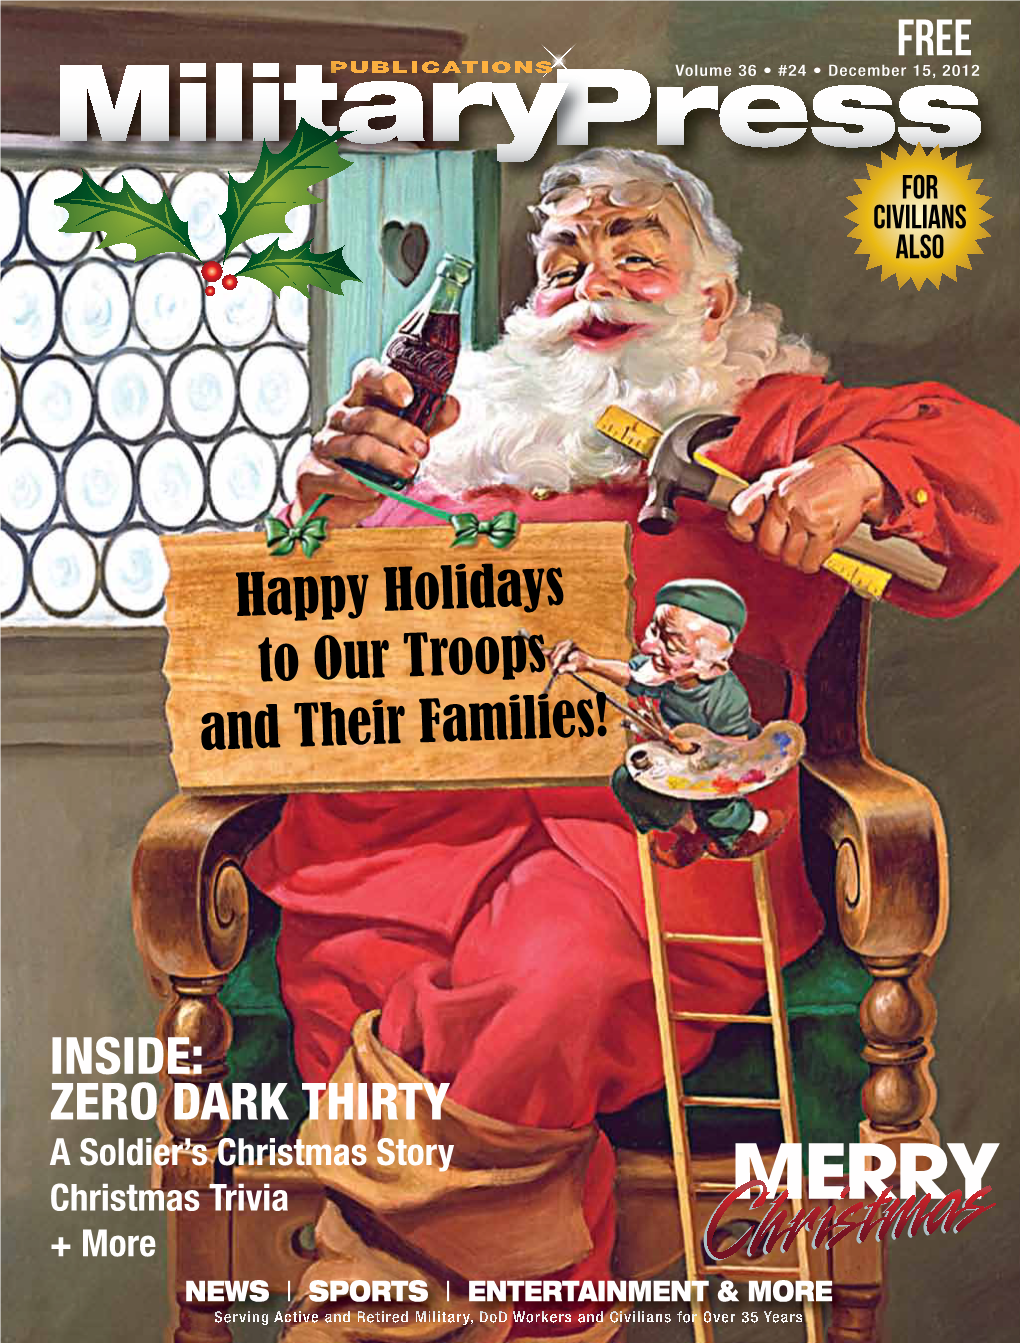 Happy Holidays to Our Troops and Their Families!